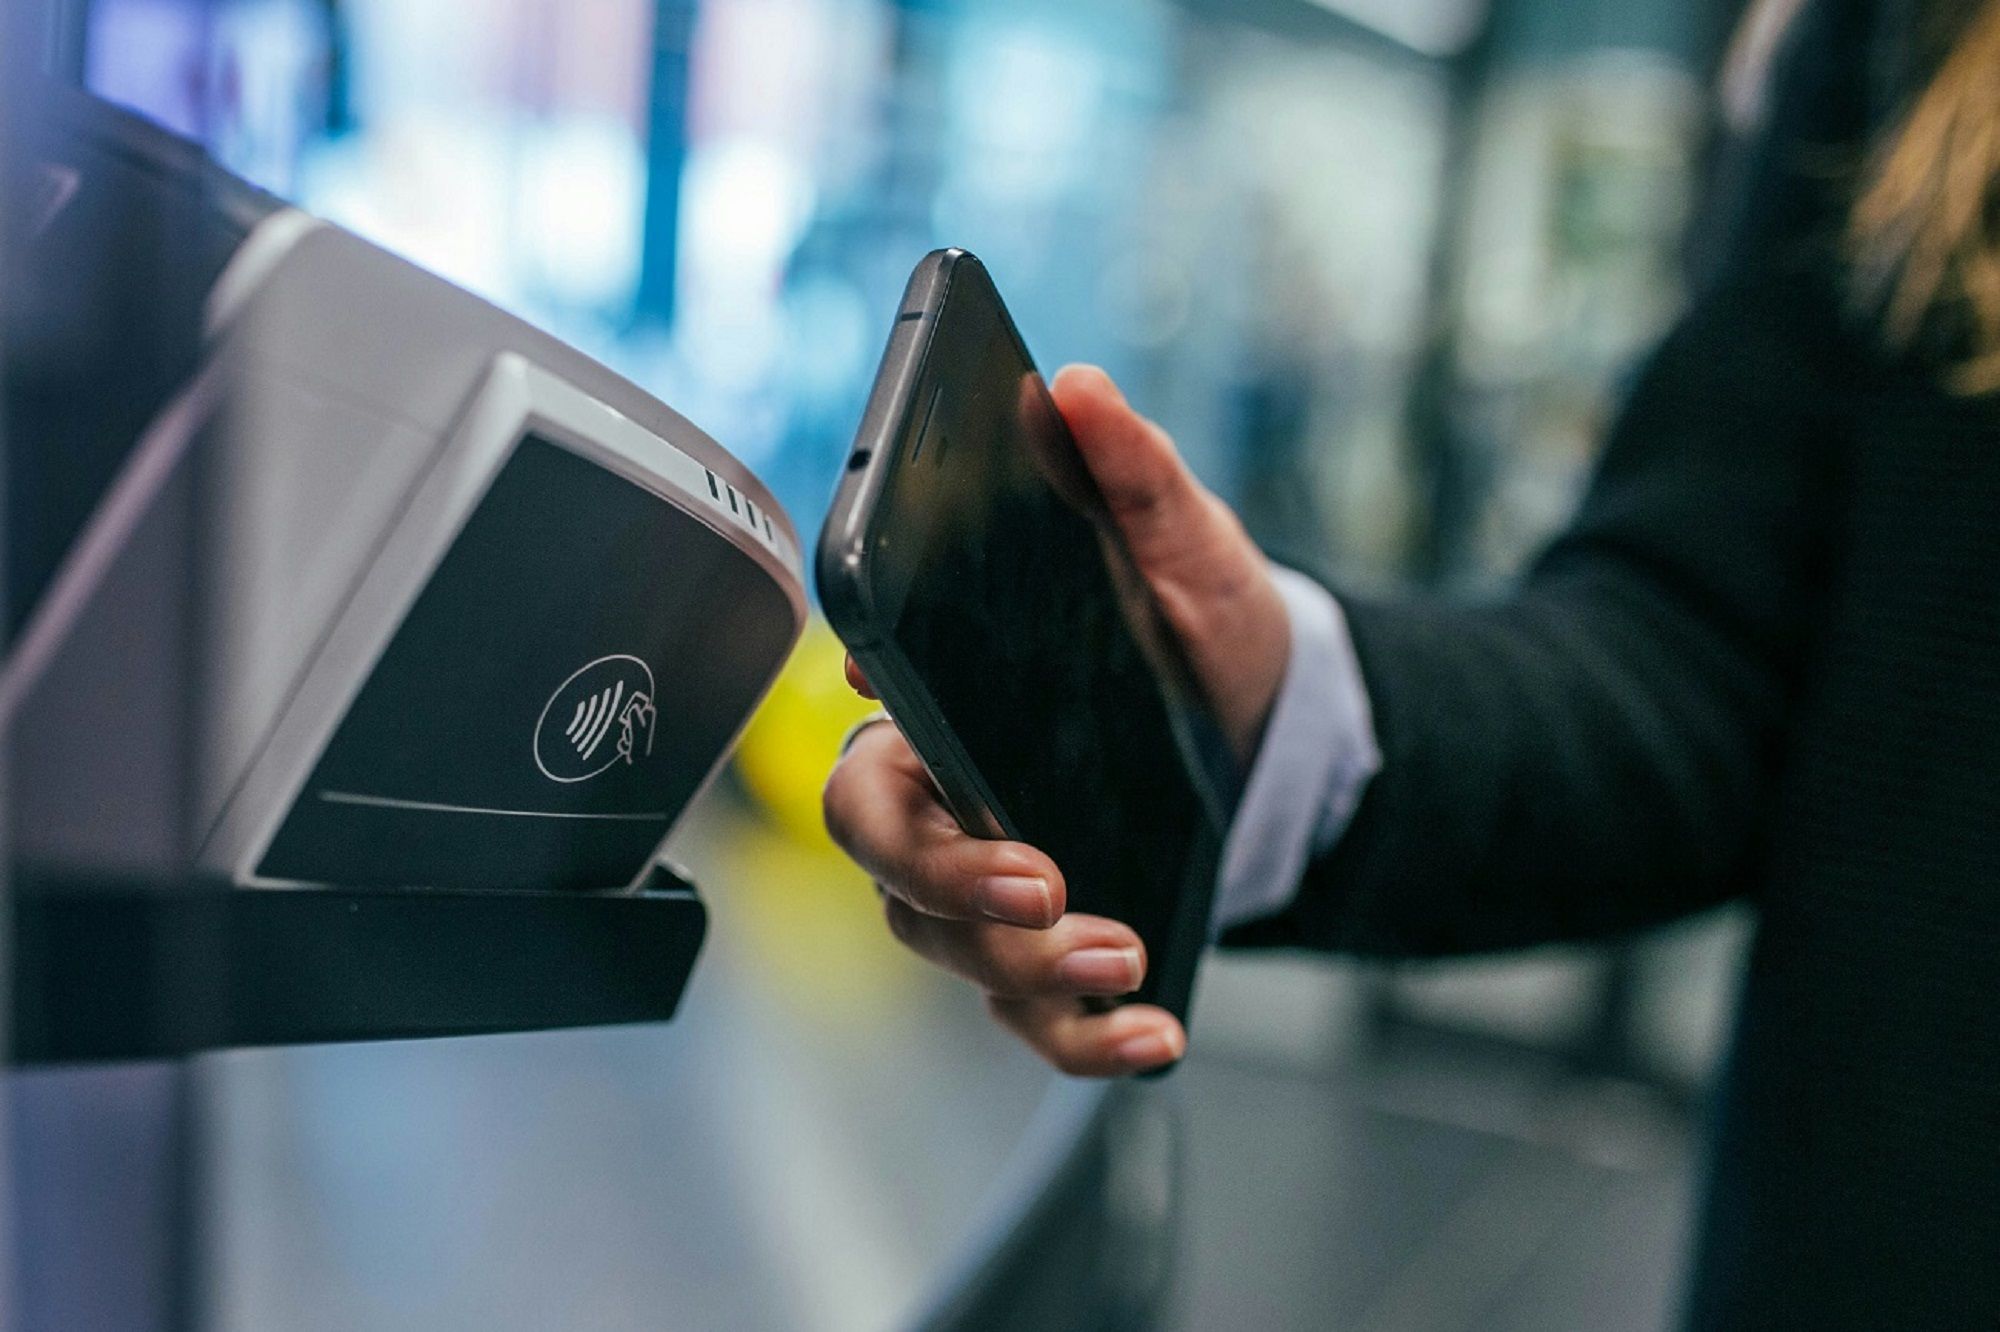 Mobile Payment using Payment Terminal. Fintech Solution